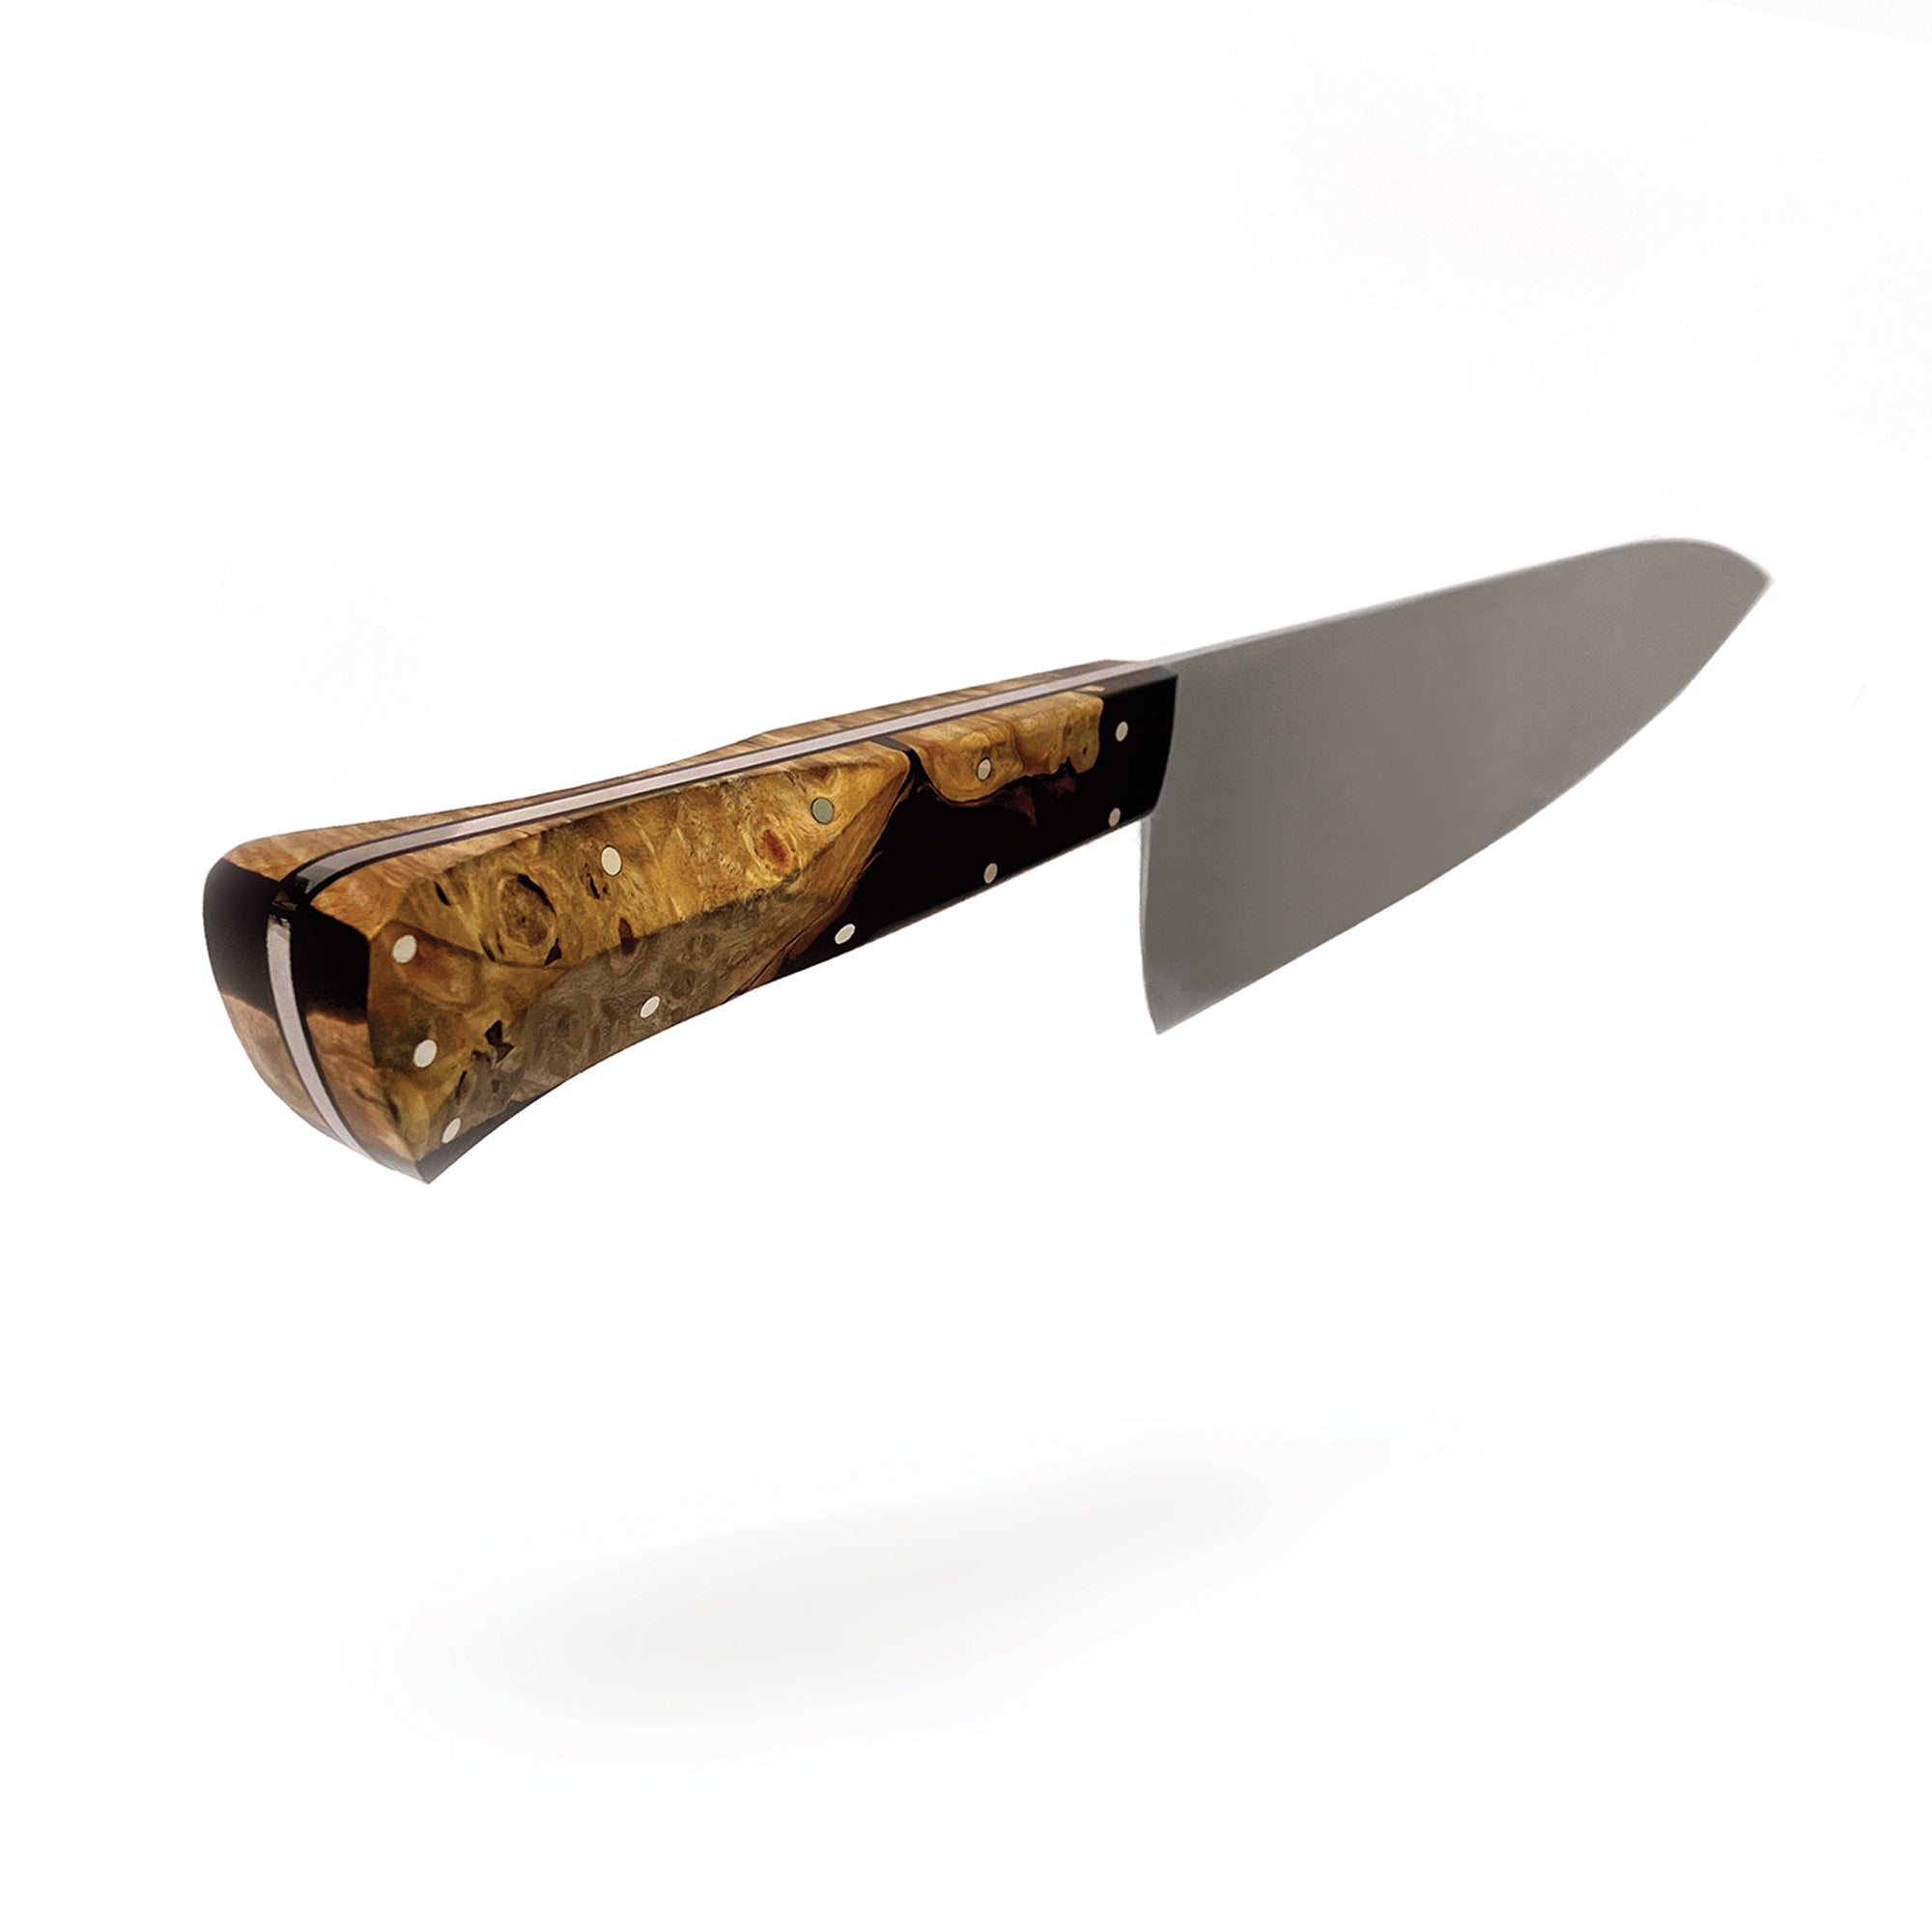 8.5" stainless steel Chef Knife by Town Cutler featuring the Desert Dawn handle made with live-edge Buckeye Burl and Nitro-V stainless steel blade.